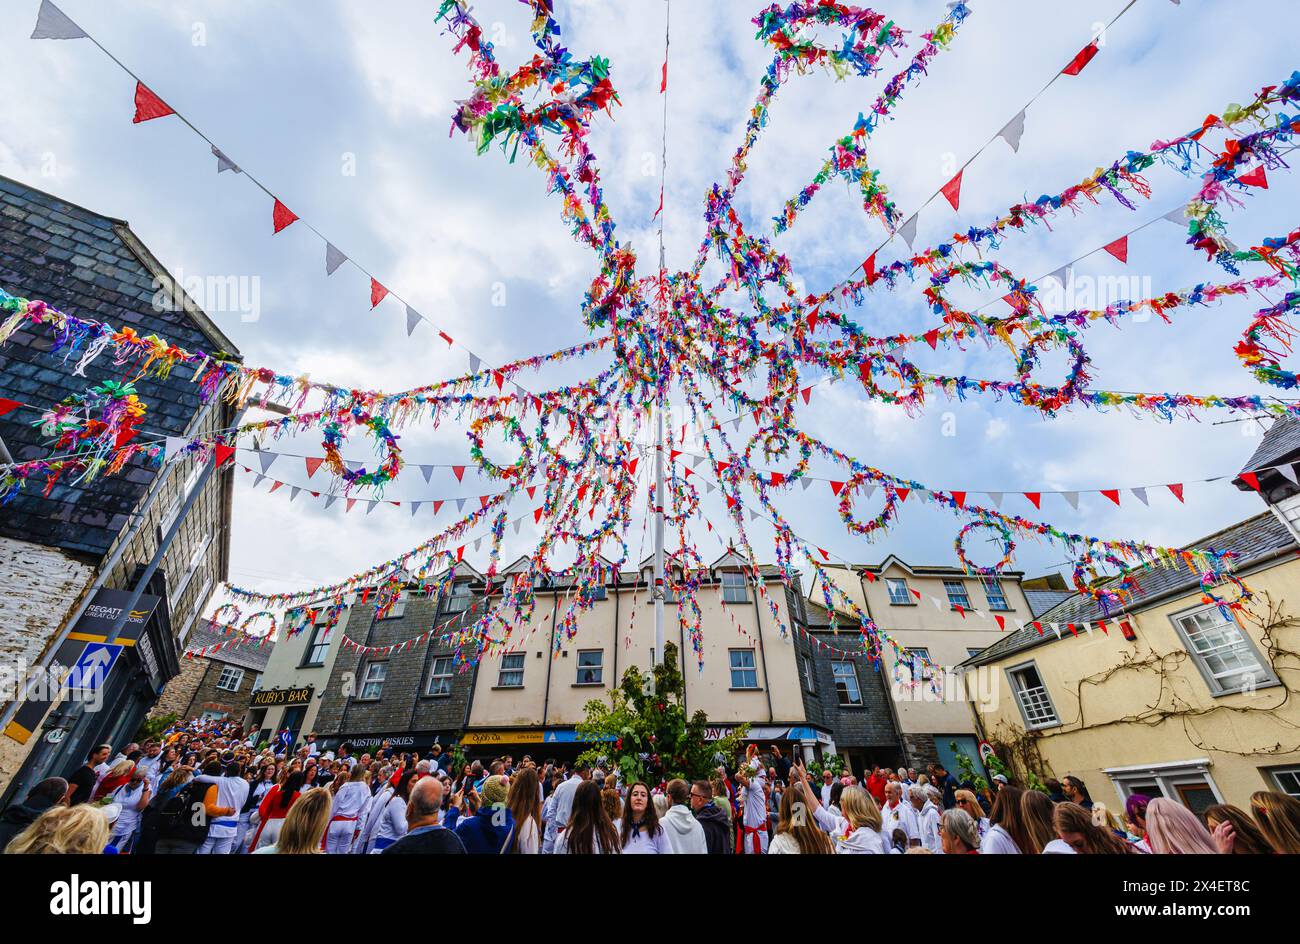 Crowds gather under the colourful maypole for the 'Obby 'Oss festival, a traditional annual folk festival on May Day in Padstow, Cornwall, England Stock Photo